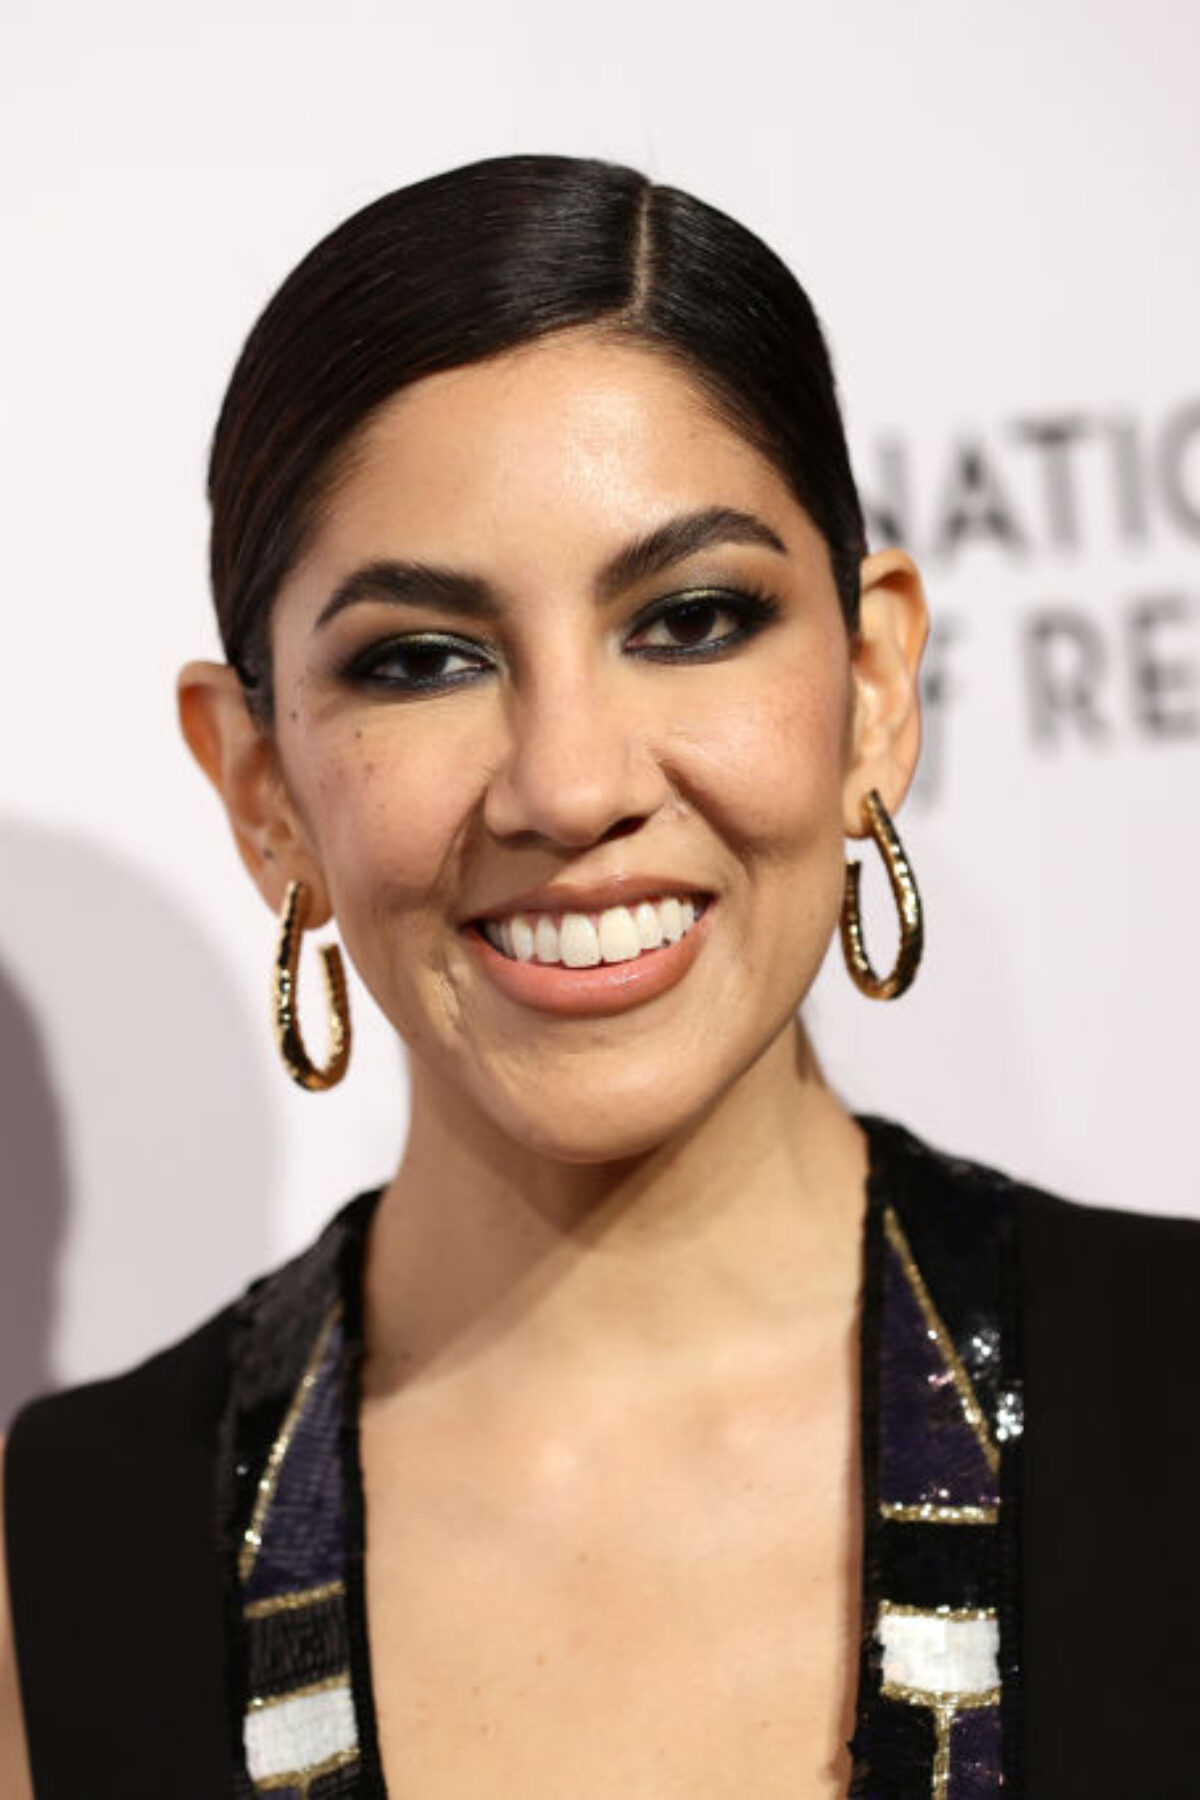 NEW YORK, NEW YORK - MARCH 15: Stephanie Beatriz attends the National Board of Review annual awards gala at Cipriani 42nd Street on March 15, 2022 in New York City. (Photo by Dimitrios Kambouris/Getty Images for National Board of Review)